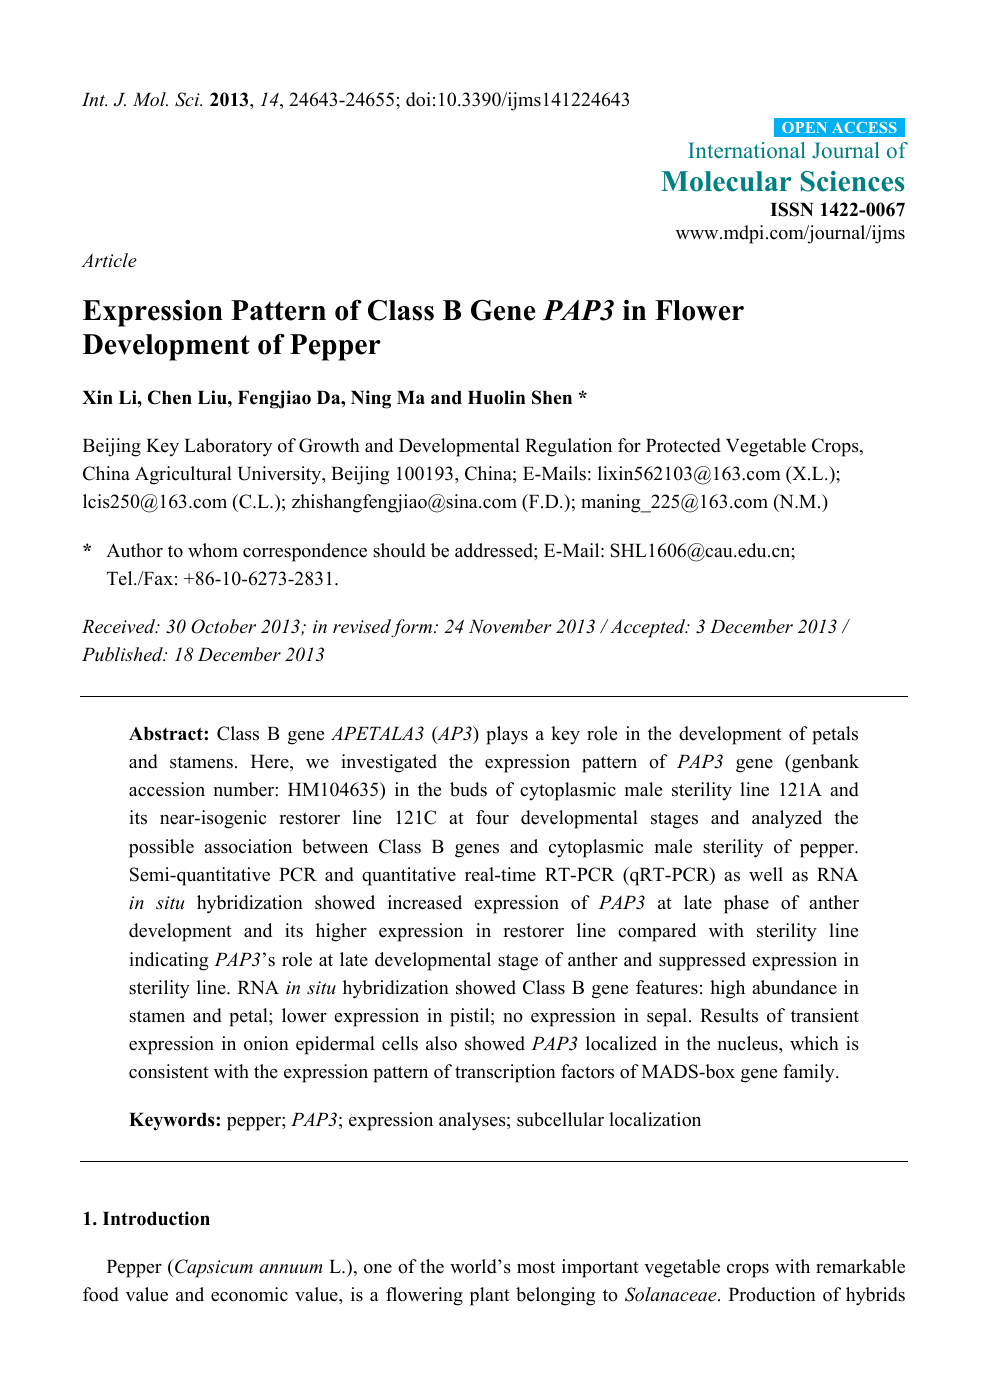 Expression Pattern Of Class B Gene Pap3 In Flower Development Of Pepper Topic Of Research Paper In Biological Sciences Download Scholarly Article Pdf And Read For Free On Cyberleninka Open Science